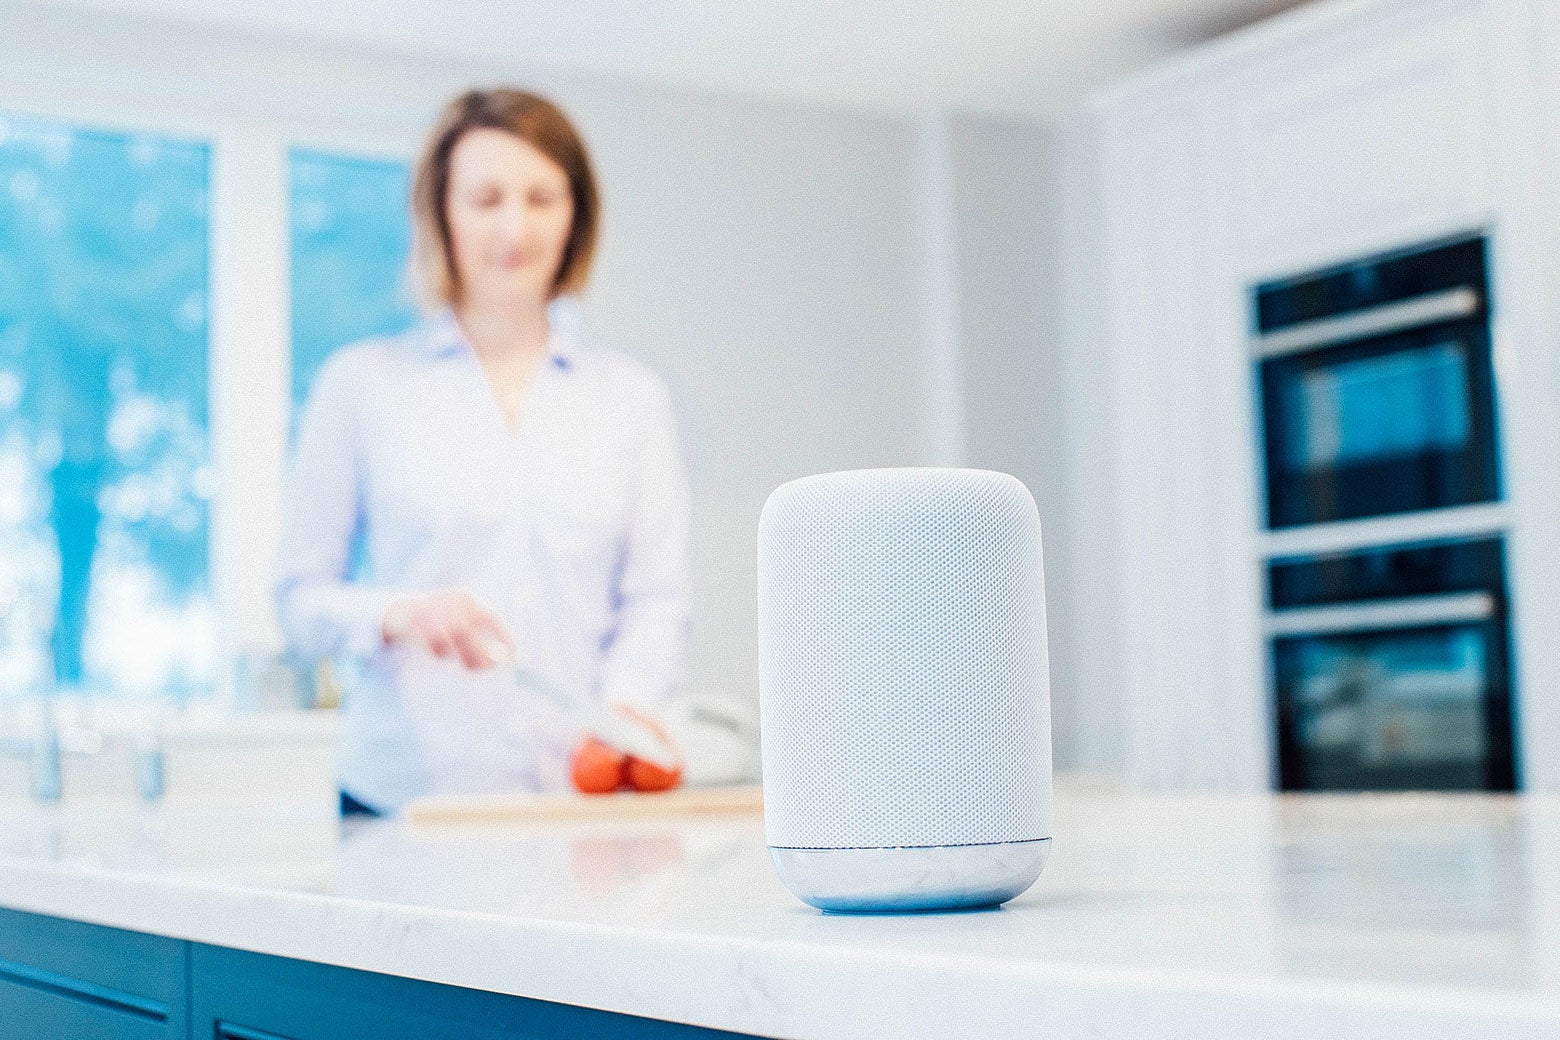 A device that looks like an Apple HomePod rests on a kitchen counter while a woman prepares food in the background.